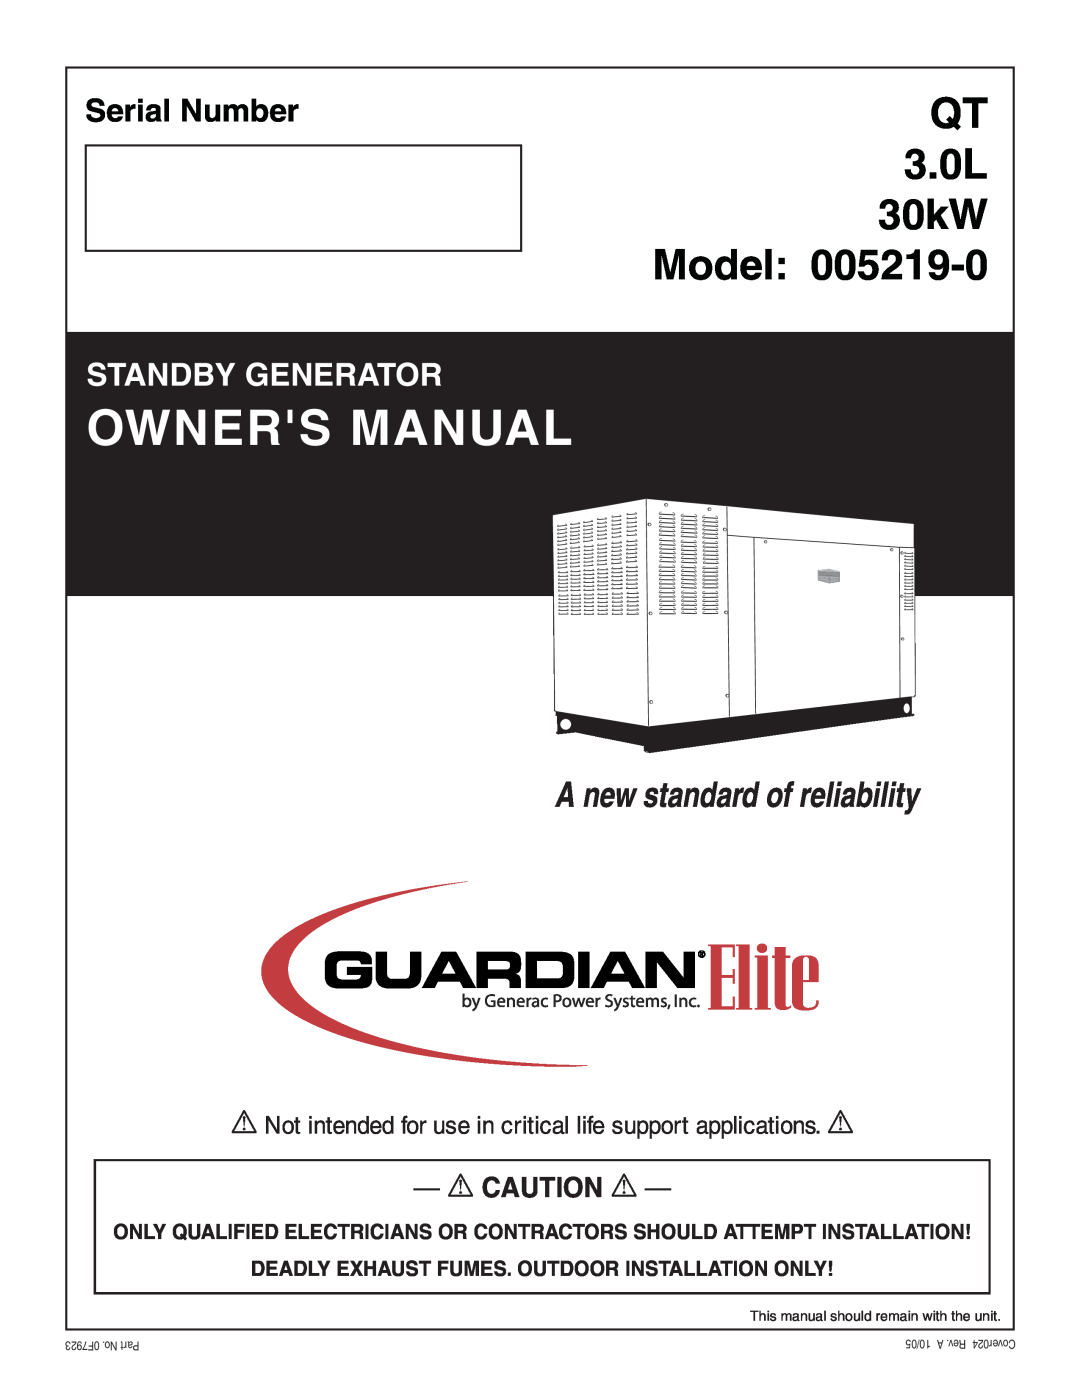 Generac Power Systems 005219-0 owner manual Model, QT 3.0L 30kW, A new standard of reliability, Serial Number 